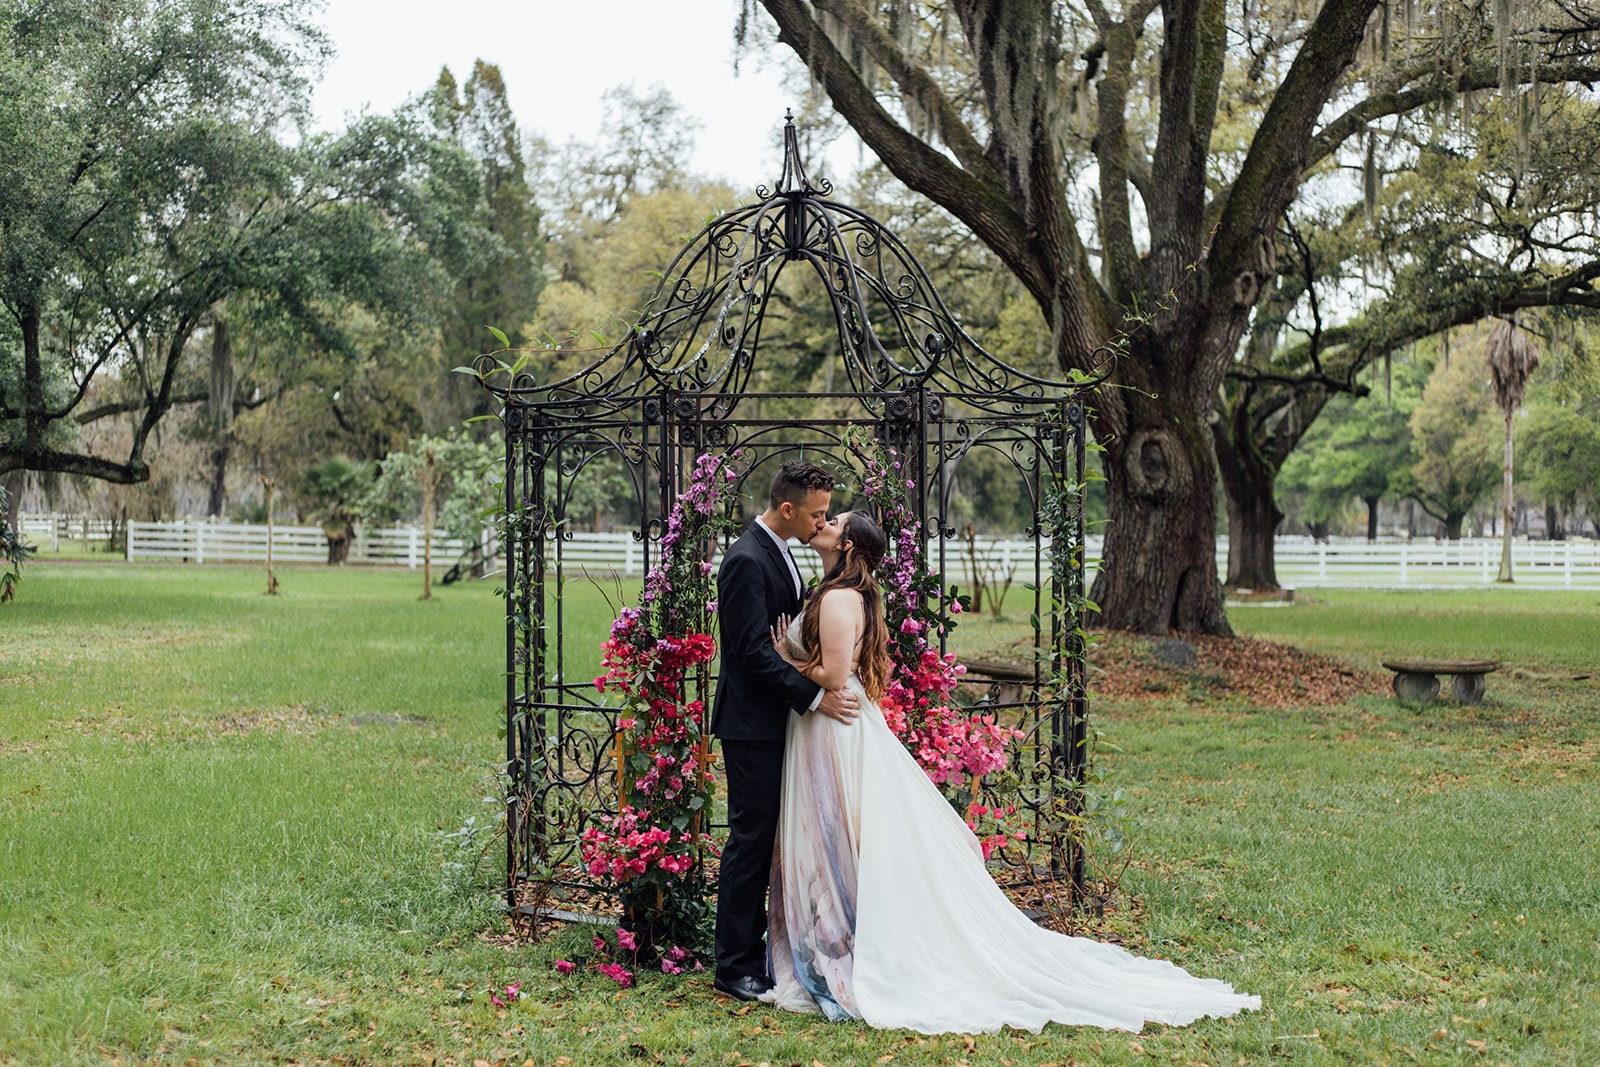 bride and groom kissing outside on their wedding day in front of steel frame gazebo